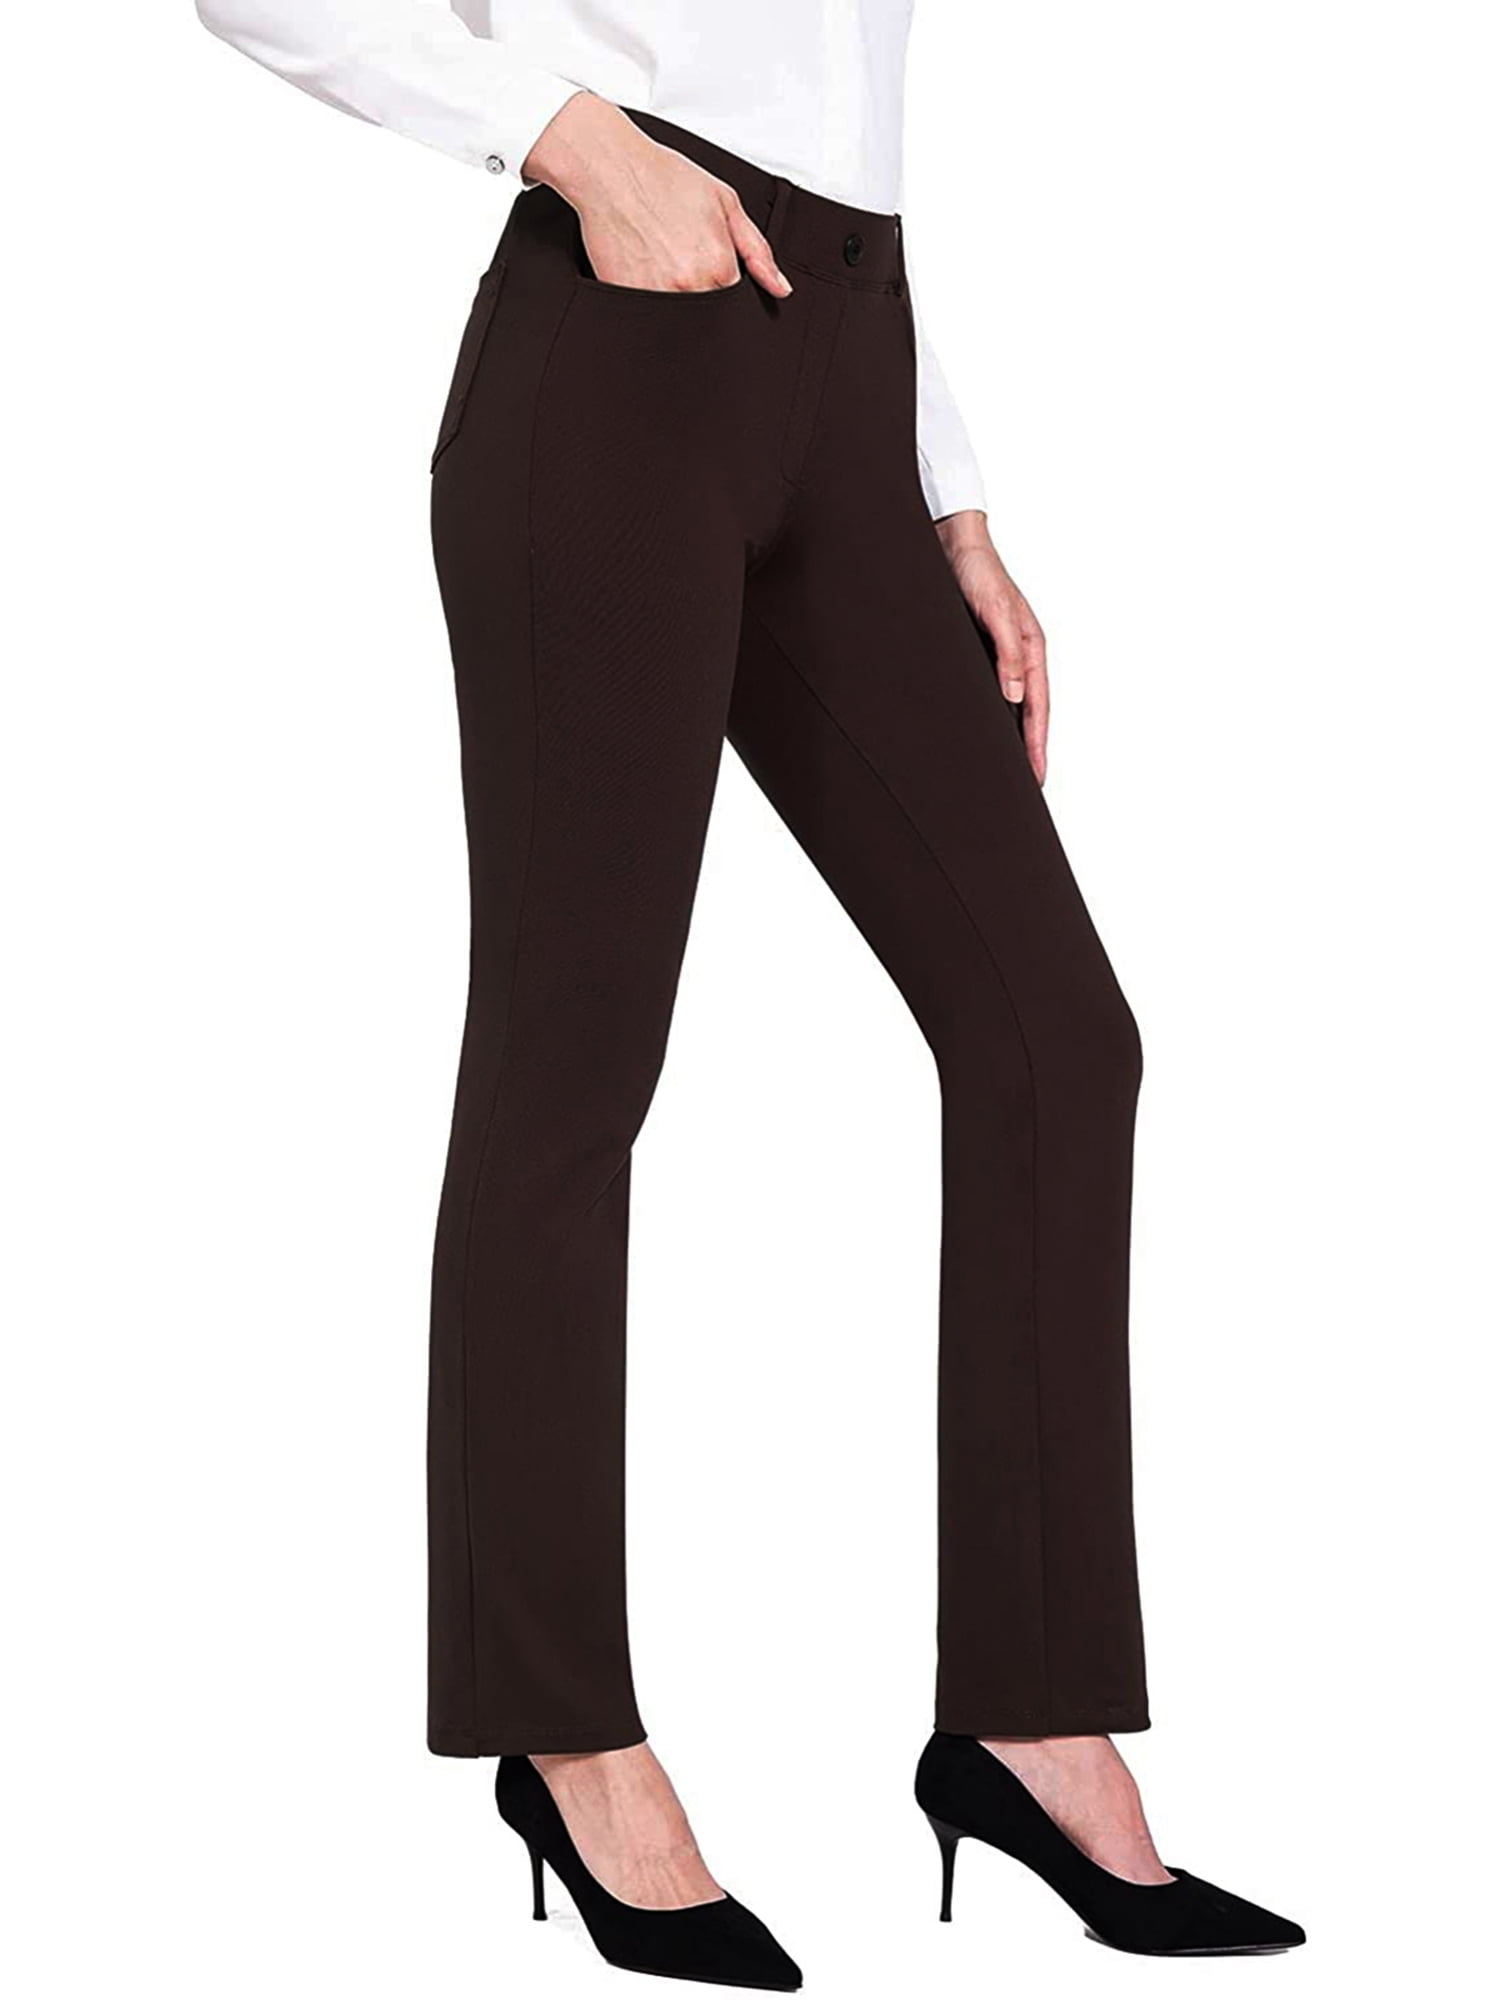 CenturyX Bootcut Yoga Pants for Women Stretchy Work Business